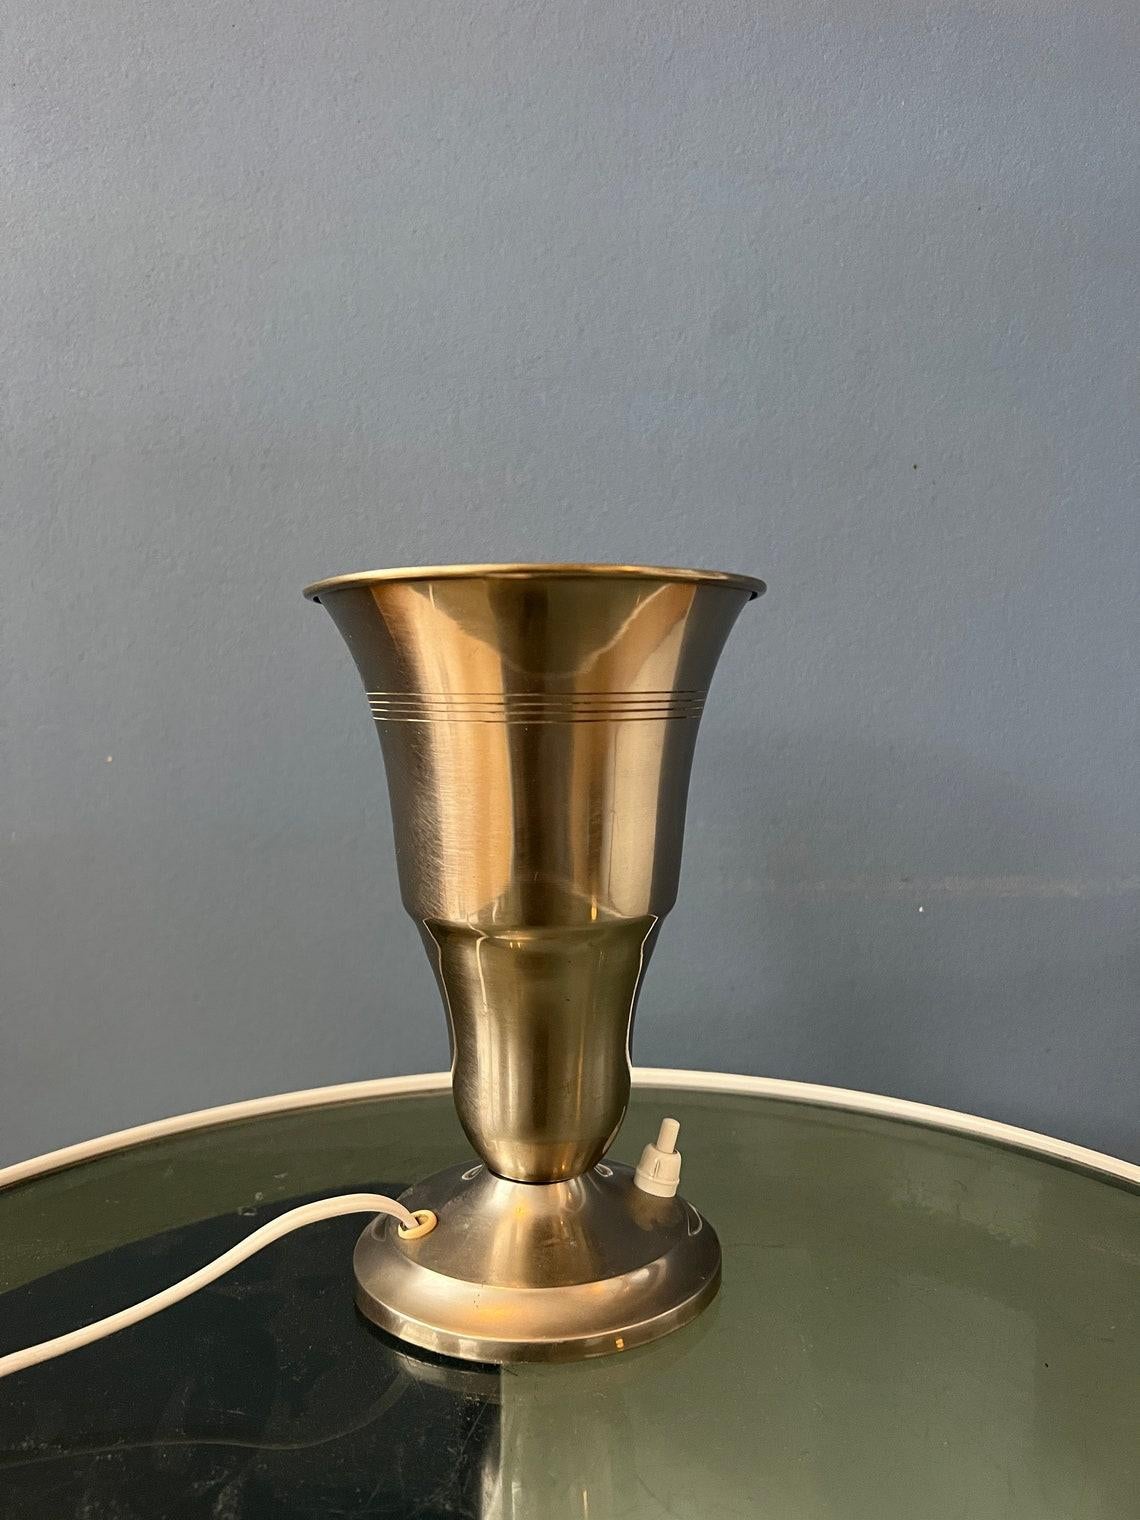 Metal Trumpet Uplighter 'Cup' Table Lamp in Silver Colour, 1970s For Sale 4